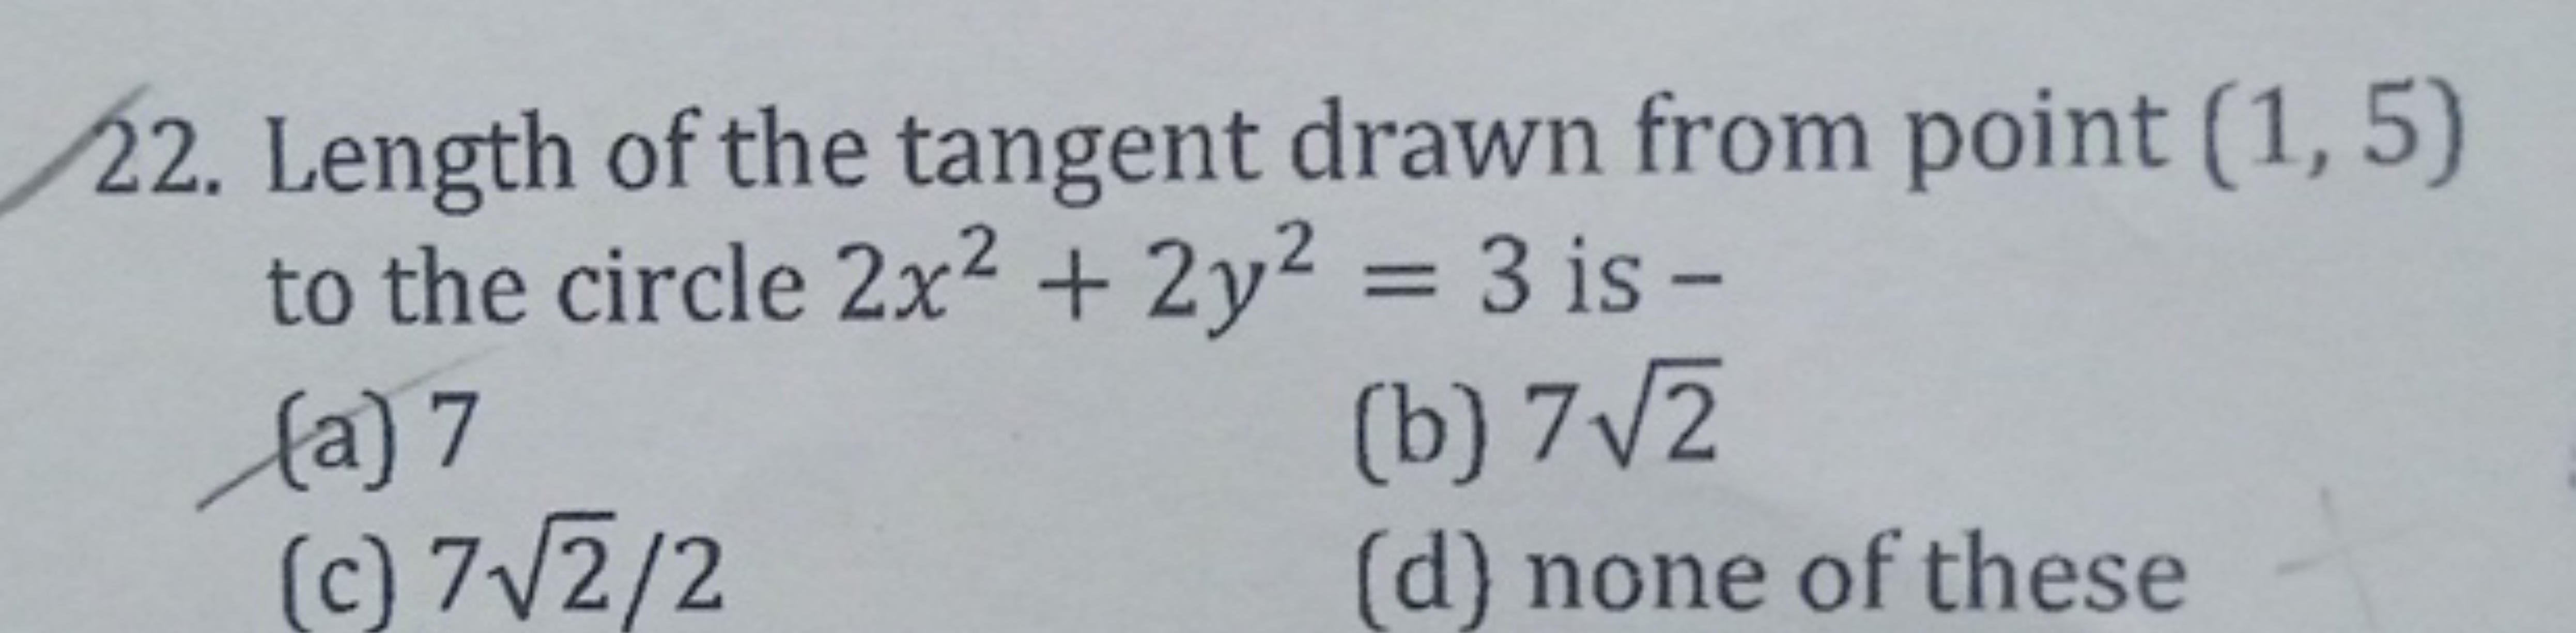 Length of the tangent drawn from point (1,5) to the circle 2x2+2y2=3 i